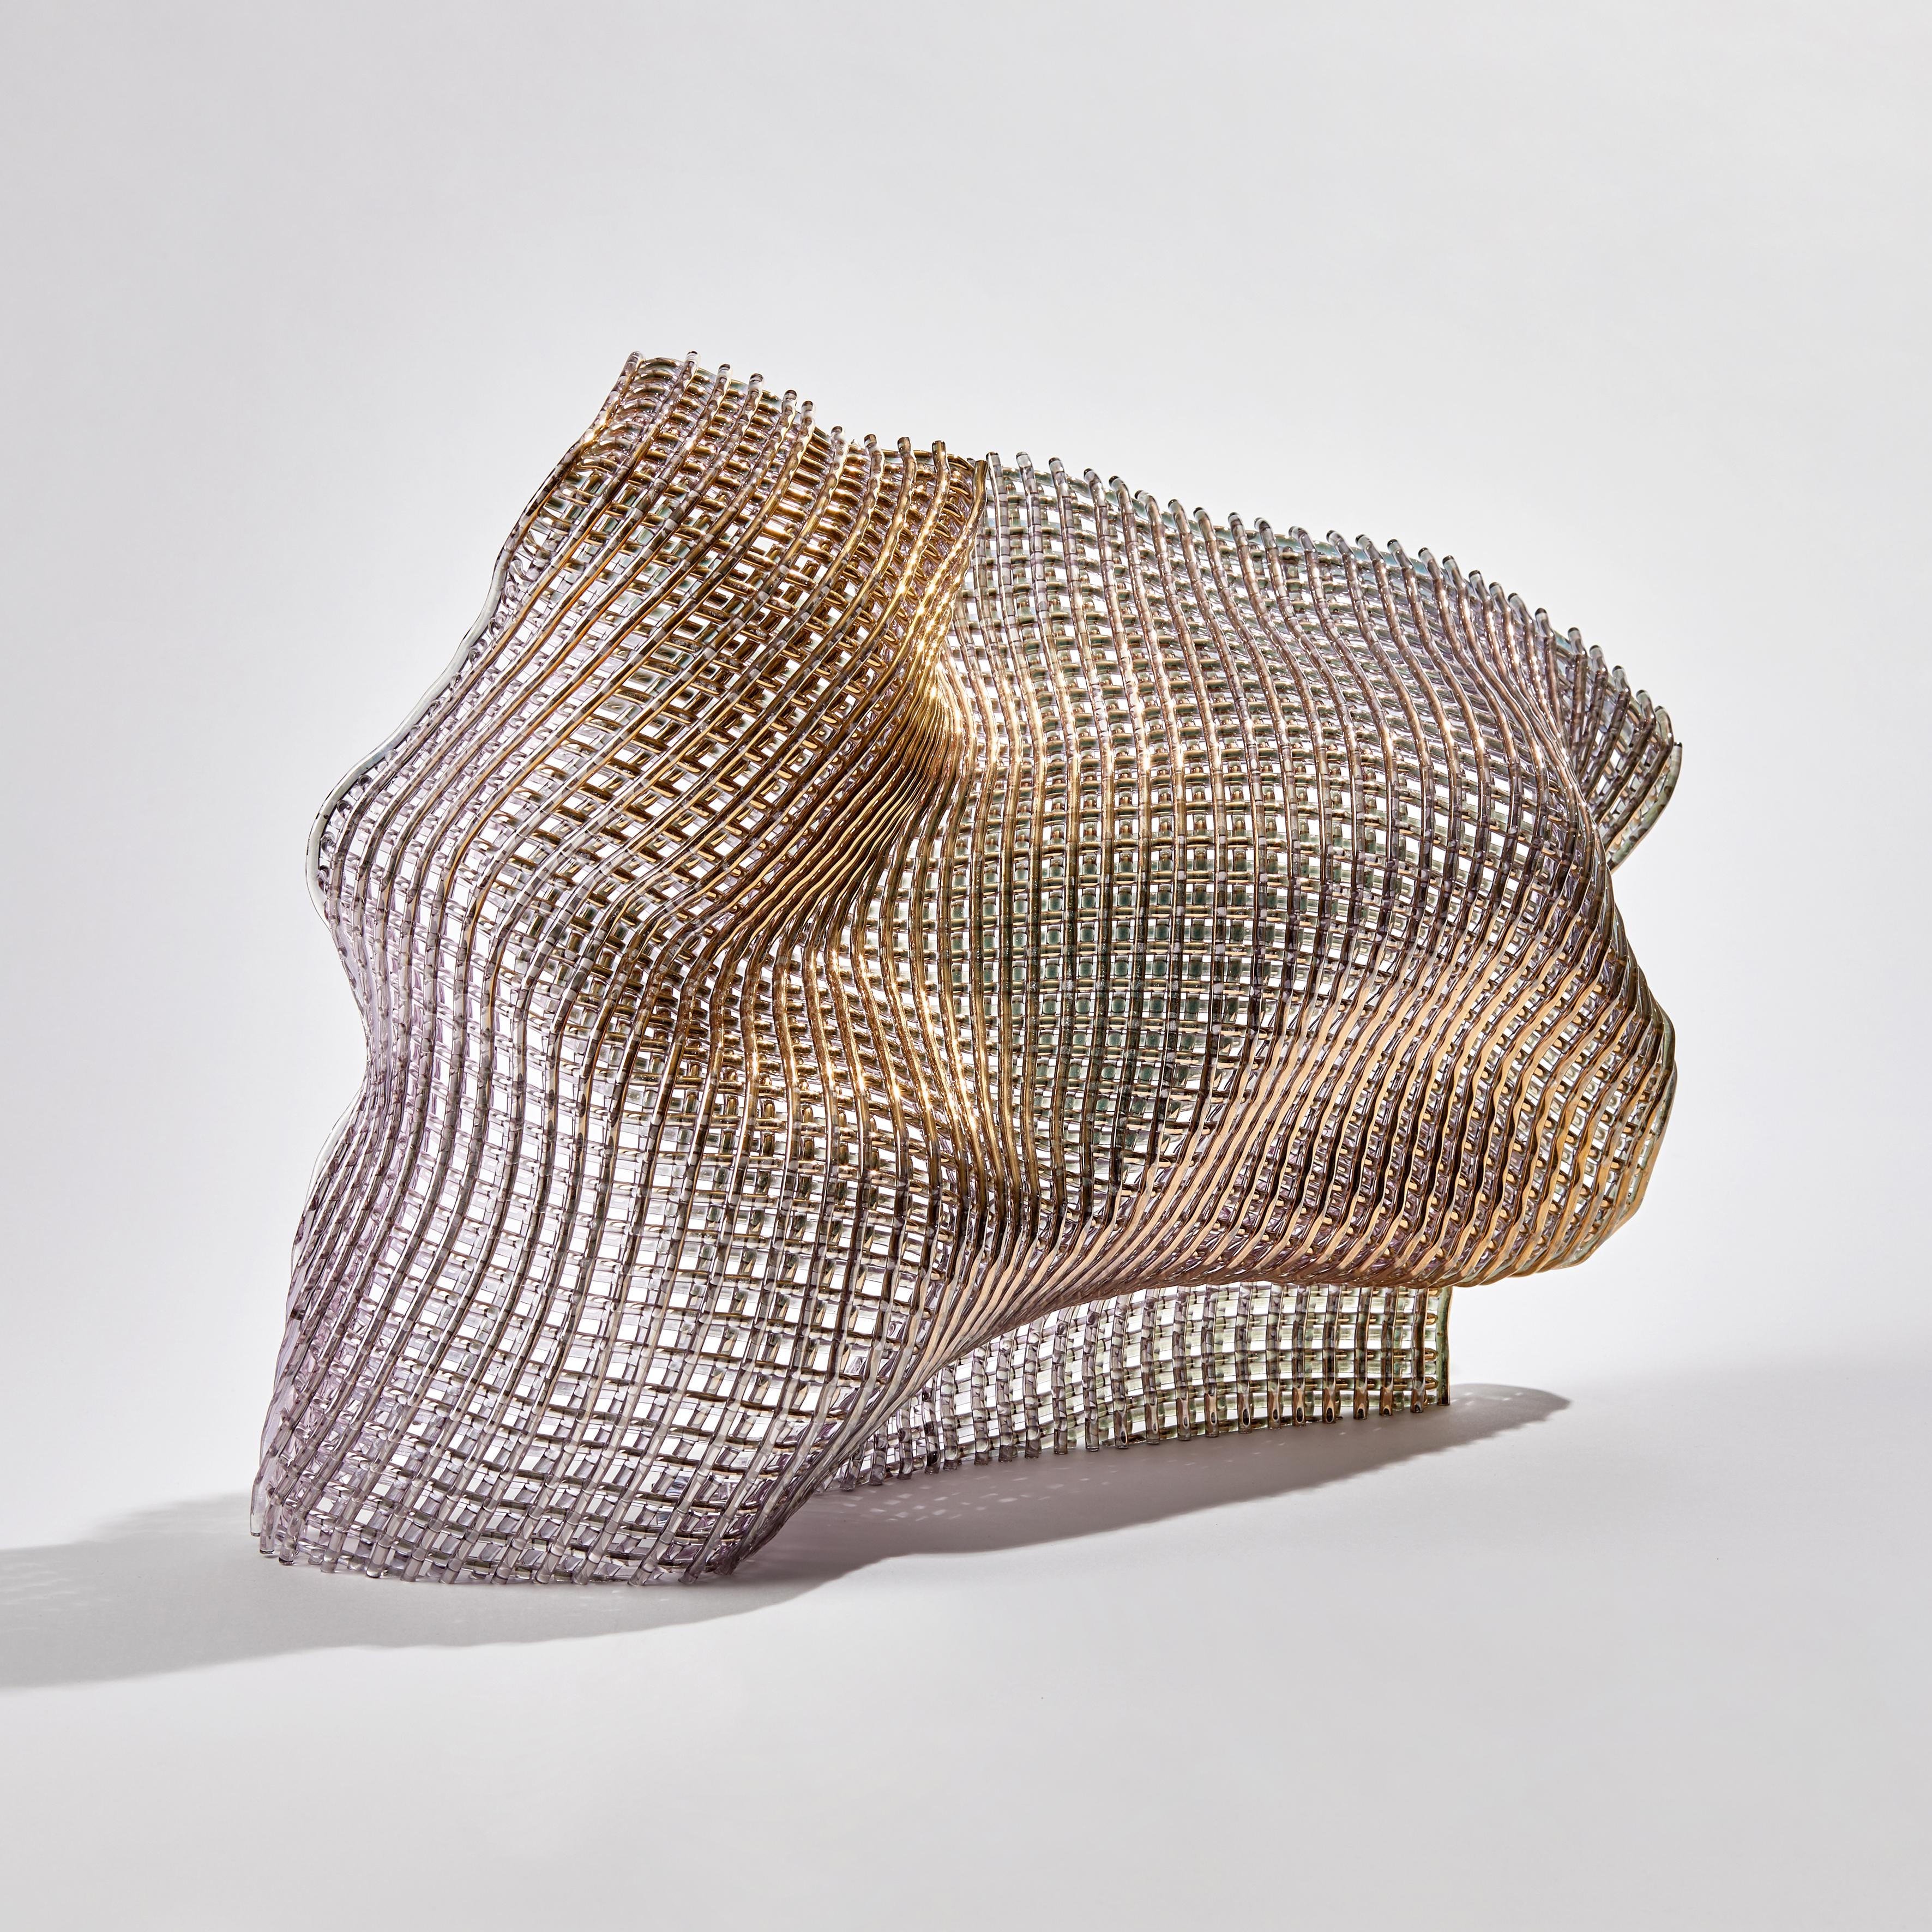 British Synchronous I, a Unique Gold and Woven Glass Sculpture by Cathryn Shilling